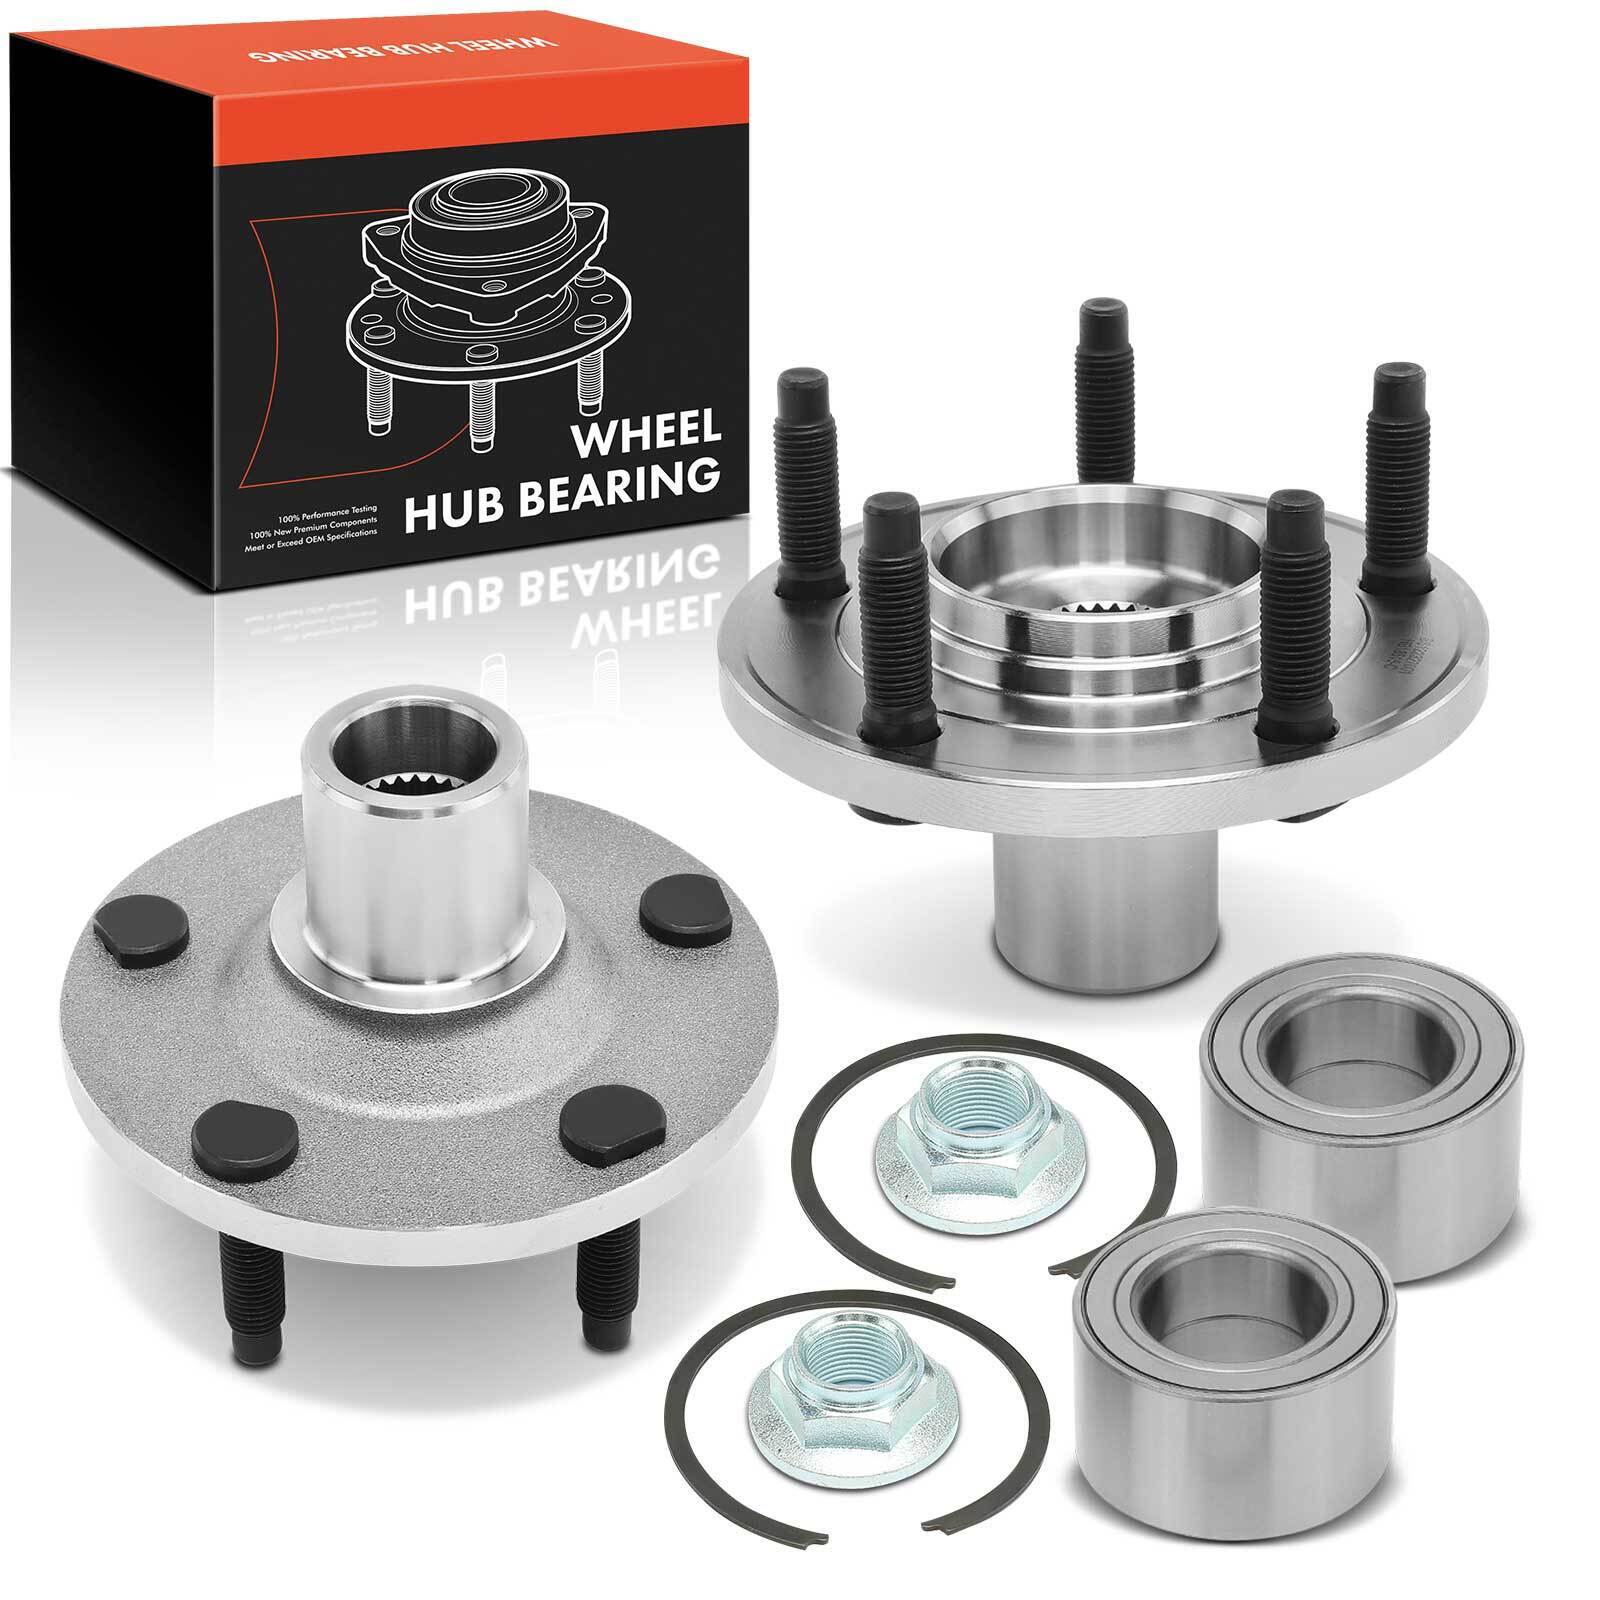 2x Front Wheel Hub and Bearing Assembly for Ford Escape 2001-2012 Mazda Tribute